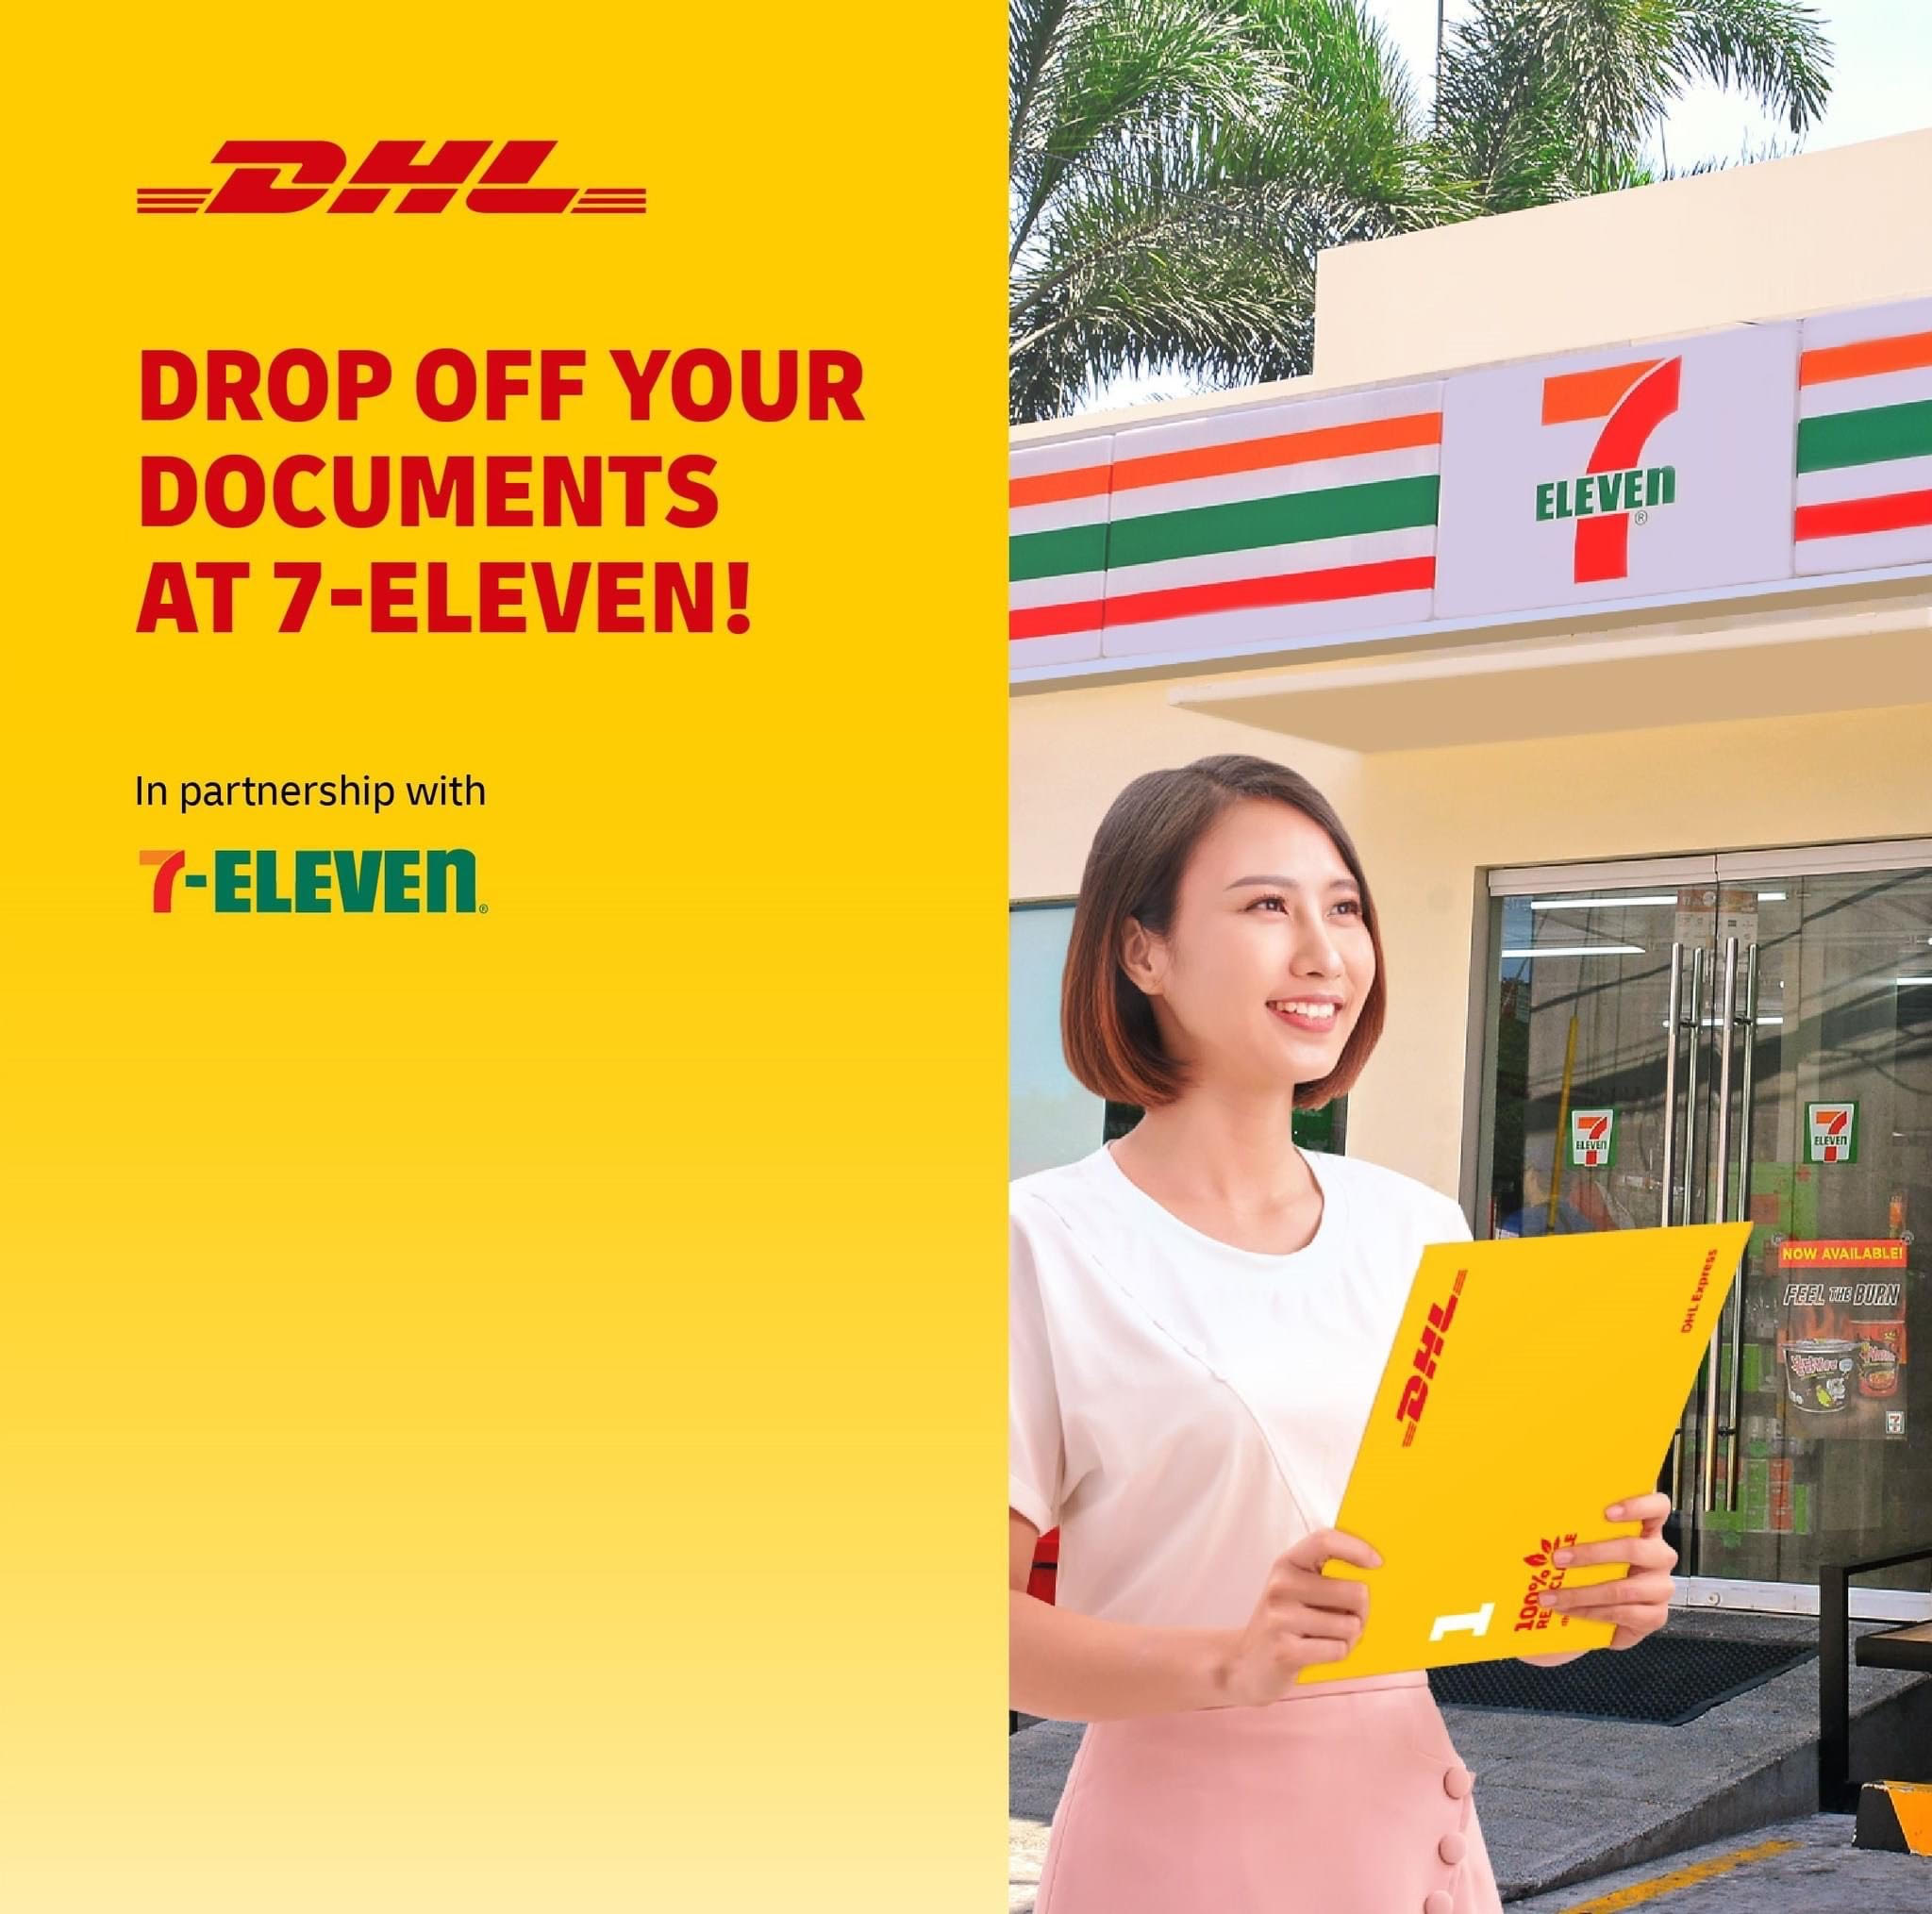 DHL Document Drop Off at Selected Stores